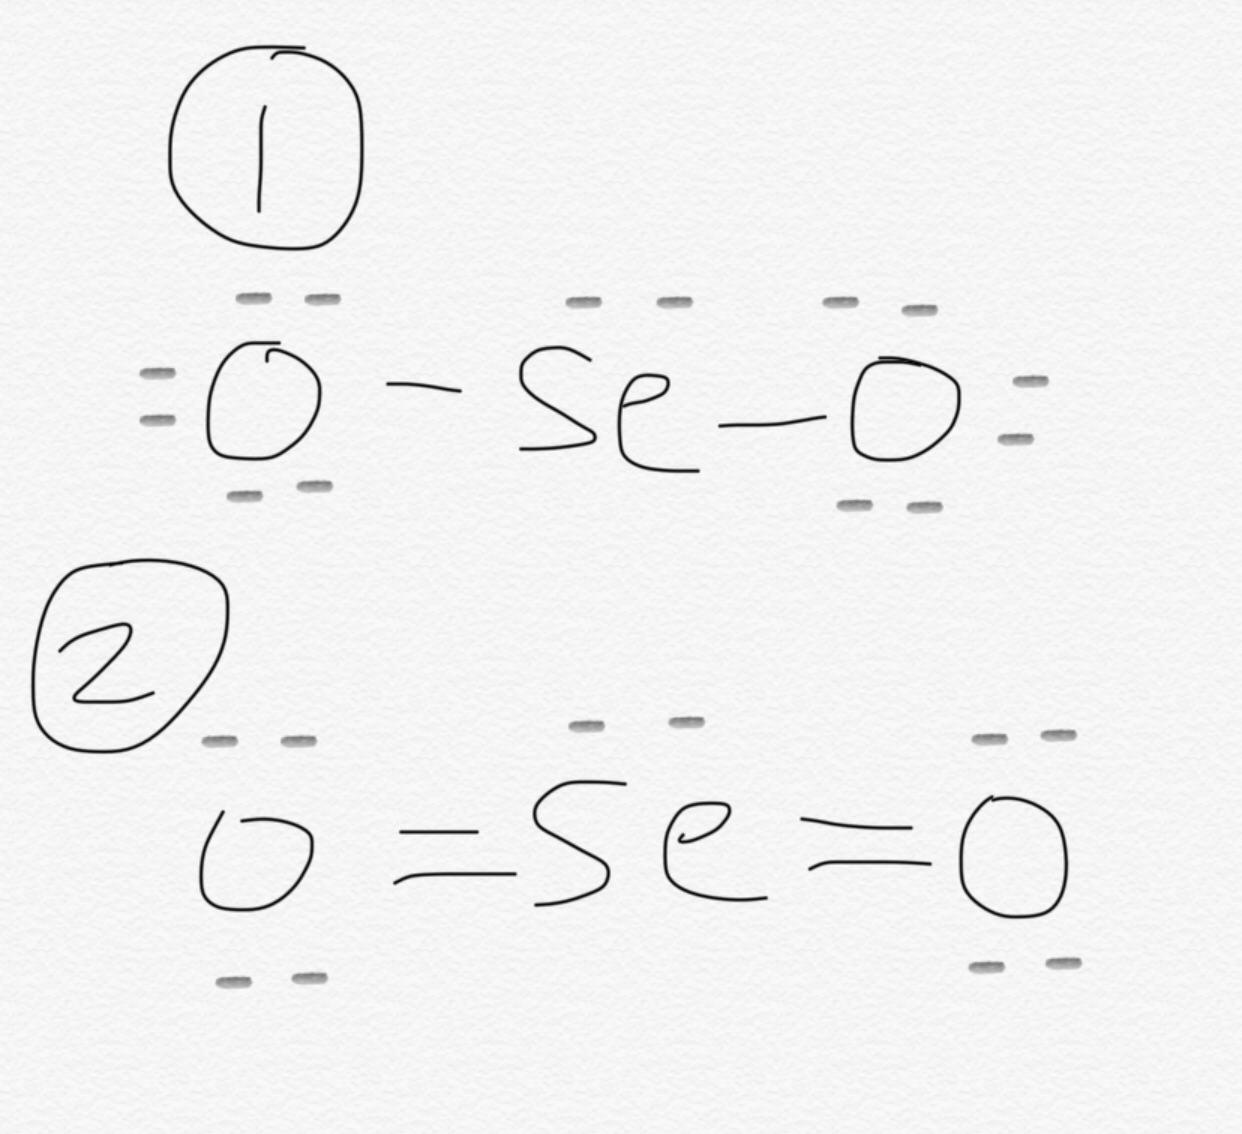 lewis structure seo2